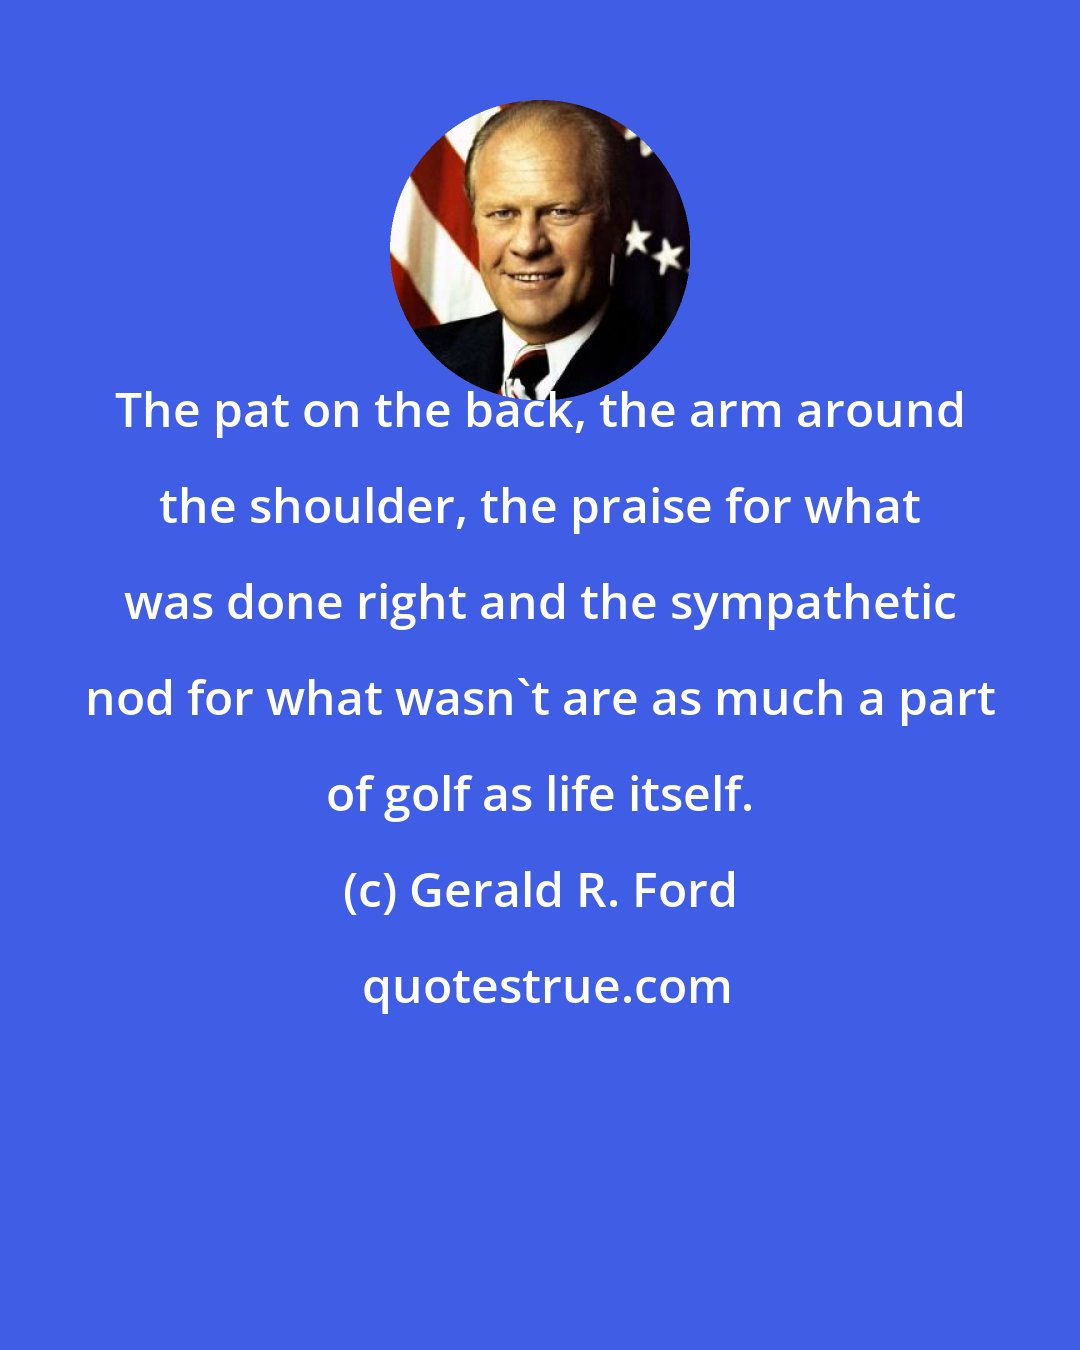 Gerald R. Ford: The pat on the back, the arm around the shoulder, the praise for what was done right and the sympathetic nod for what wasn't are as much a part of golf as life itself.